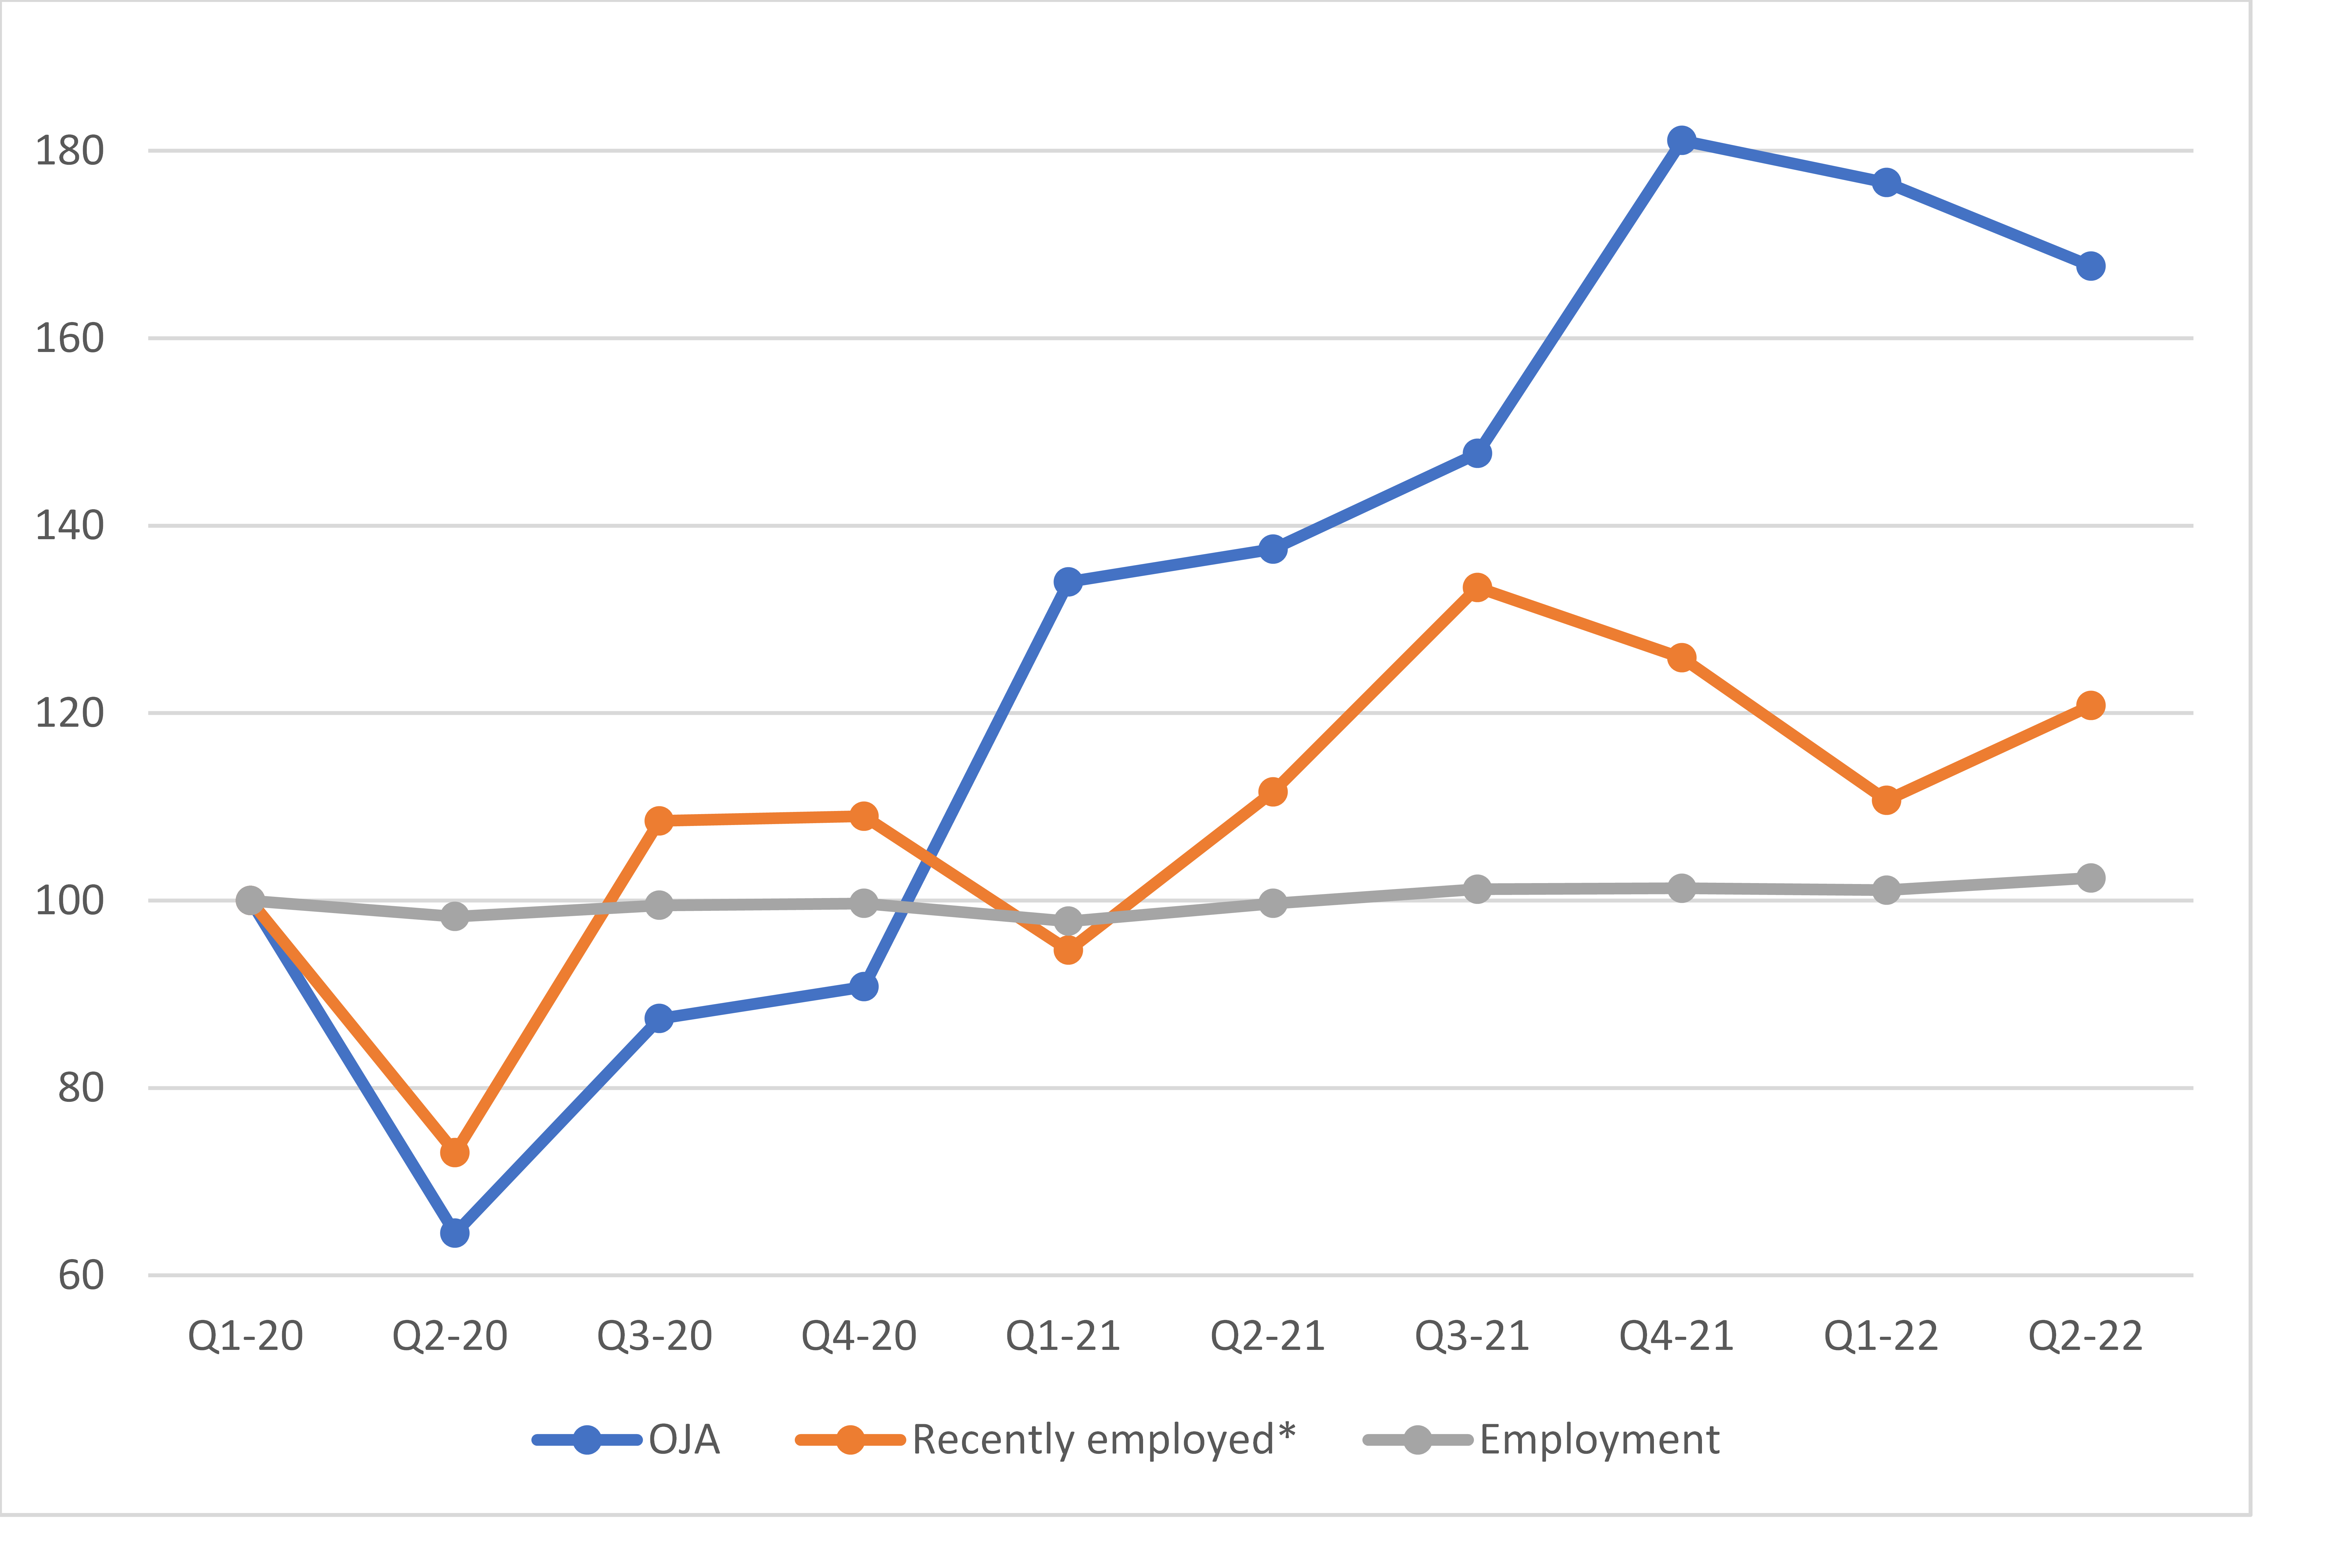 Change in OJAs and employment